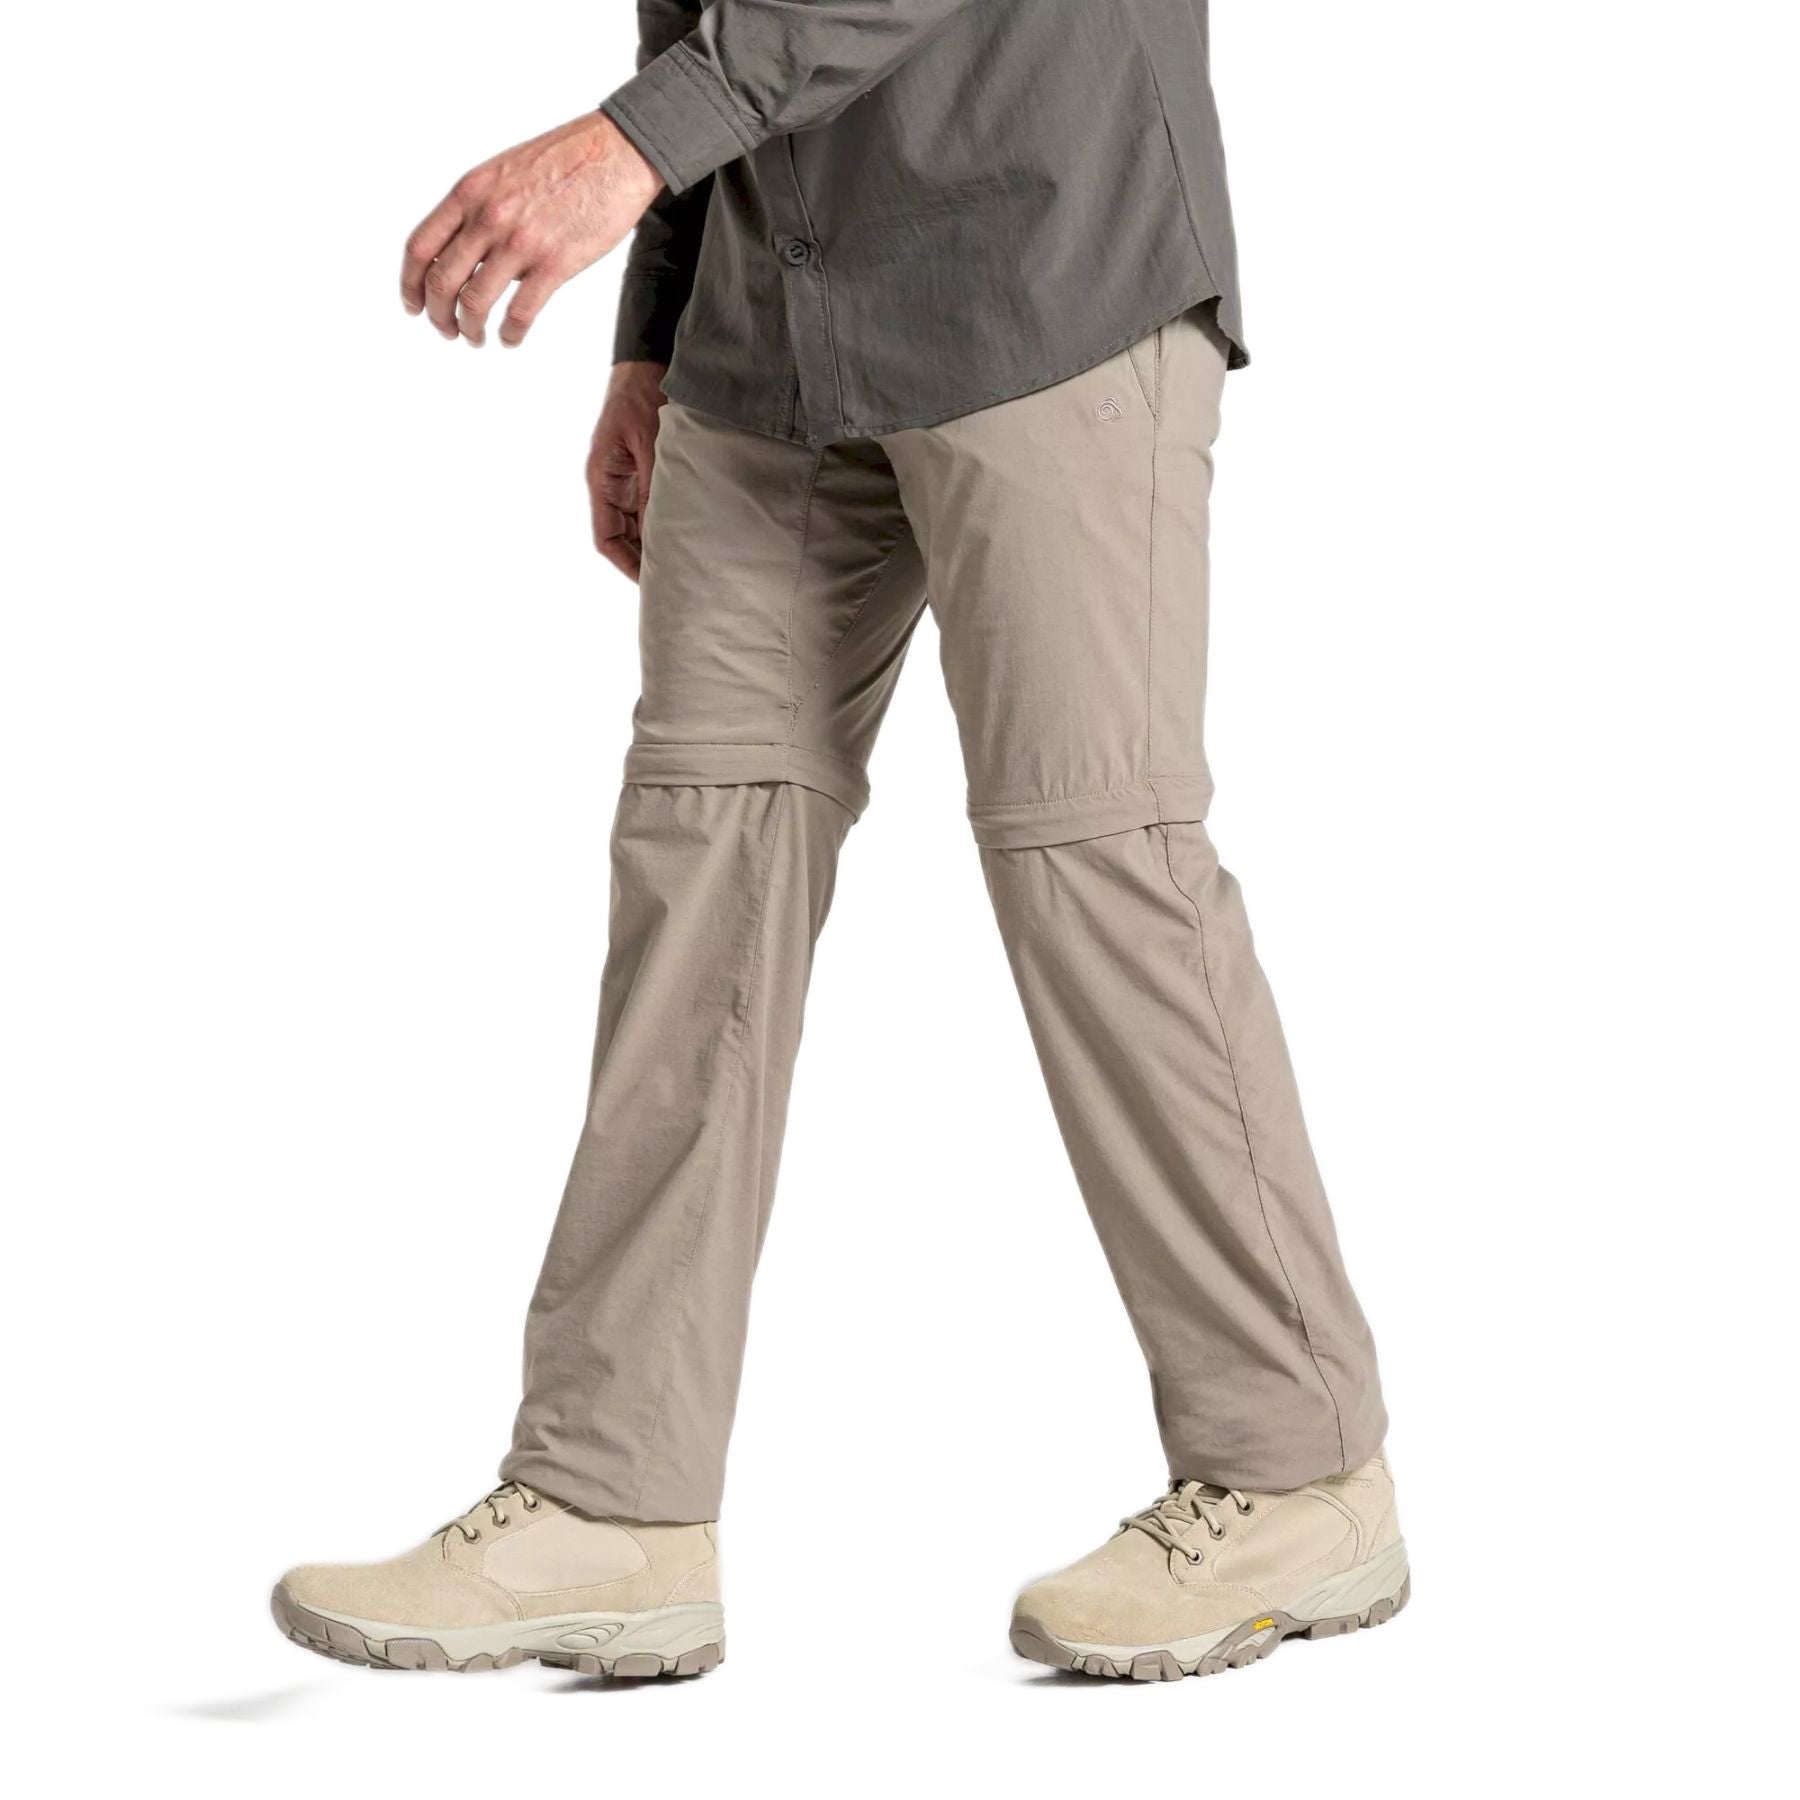 NxTSTOP Soft Shell Jacket  Travel Pant Review  Durability Matters